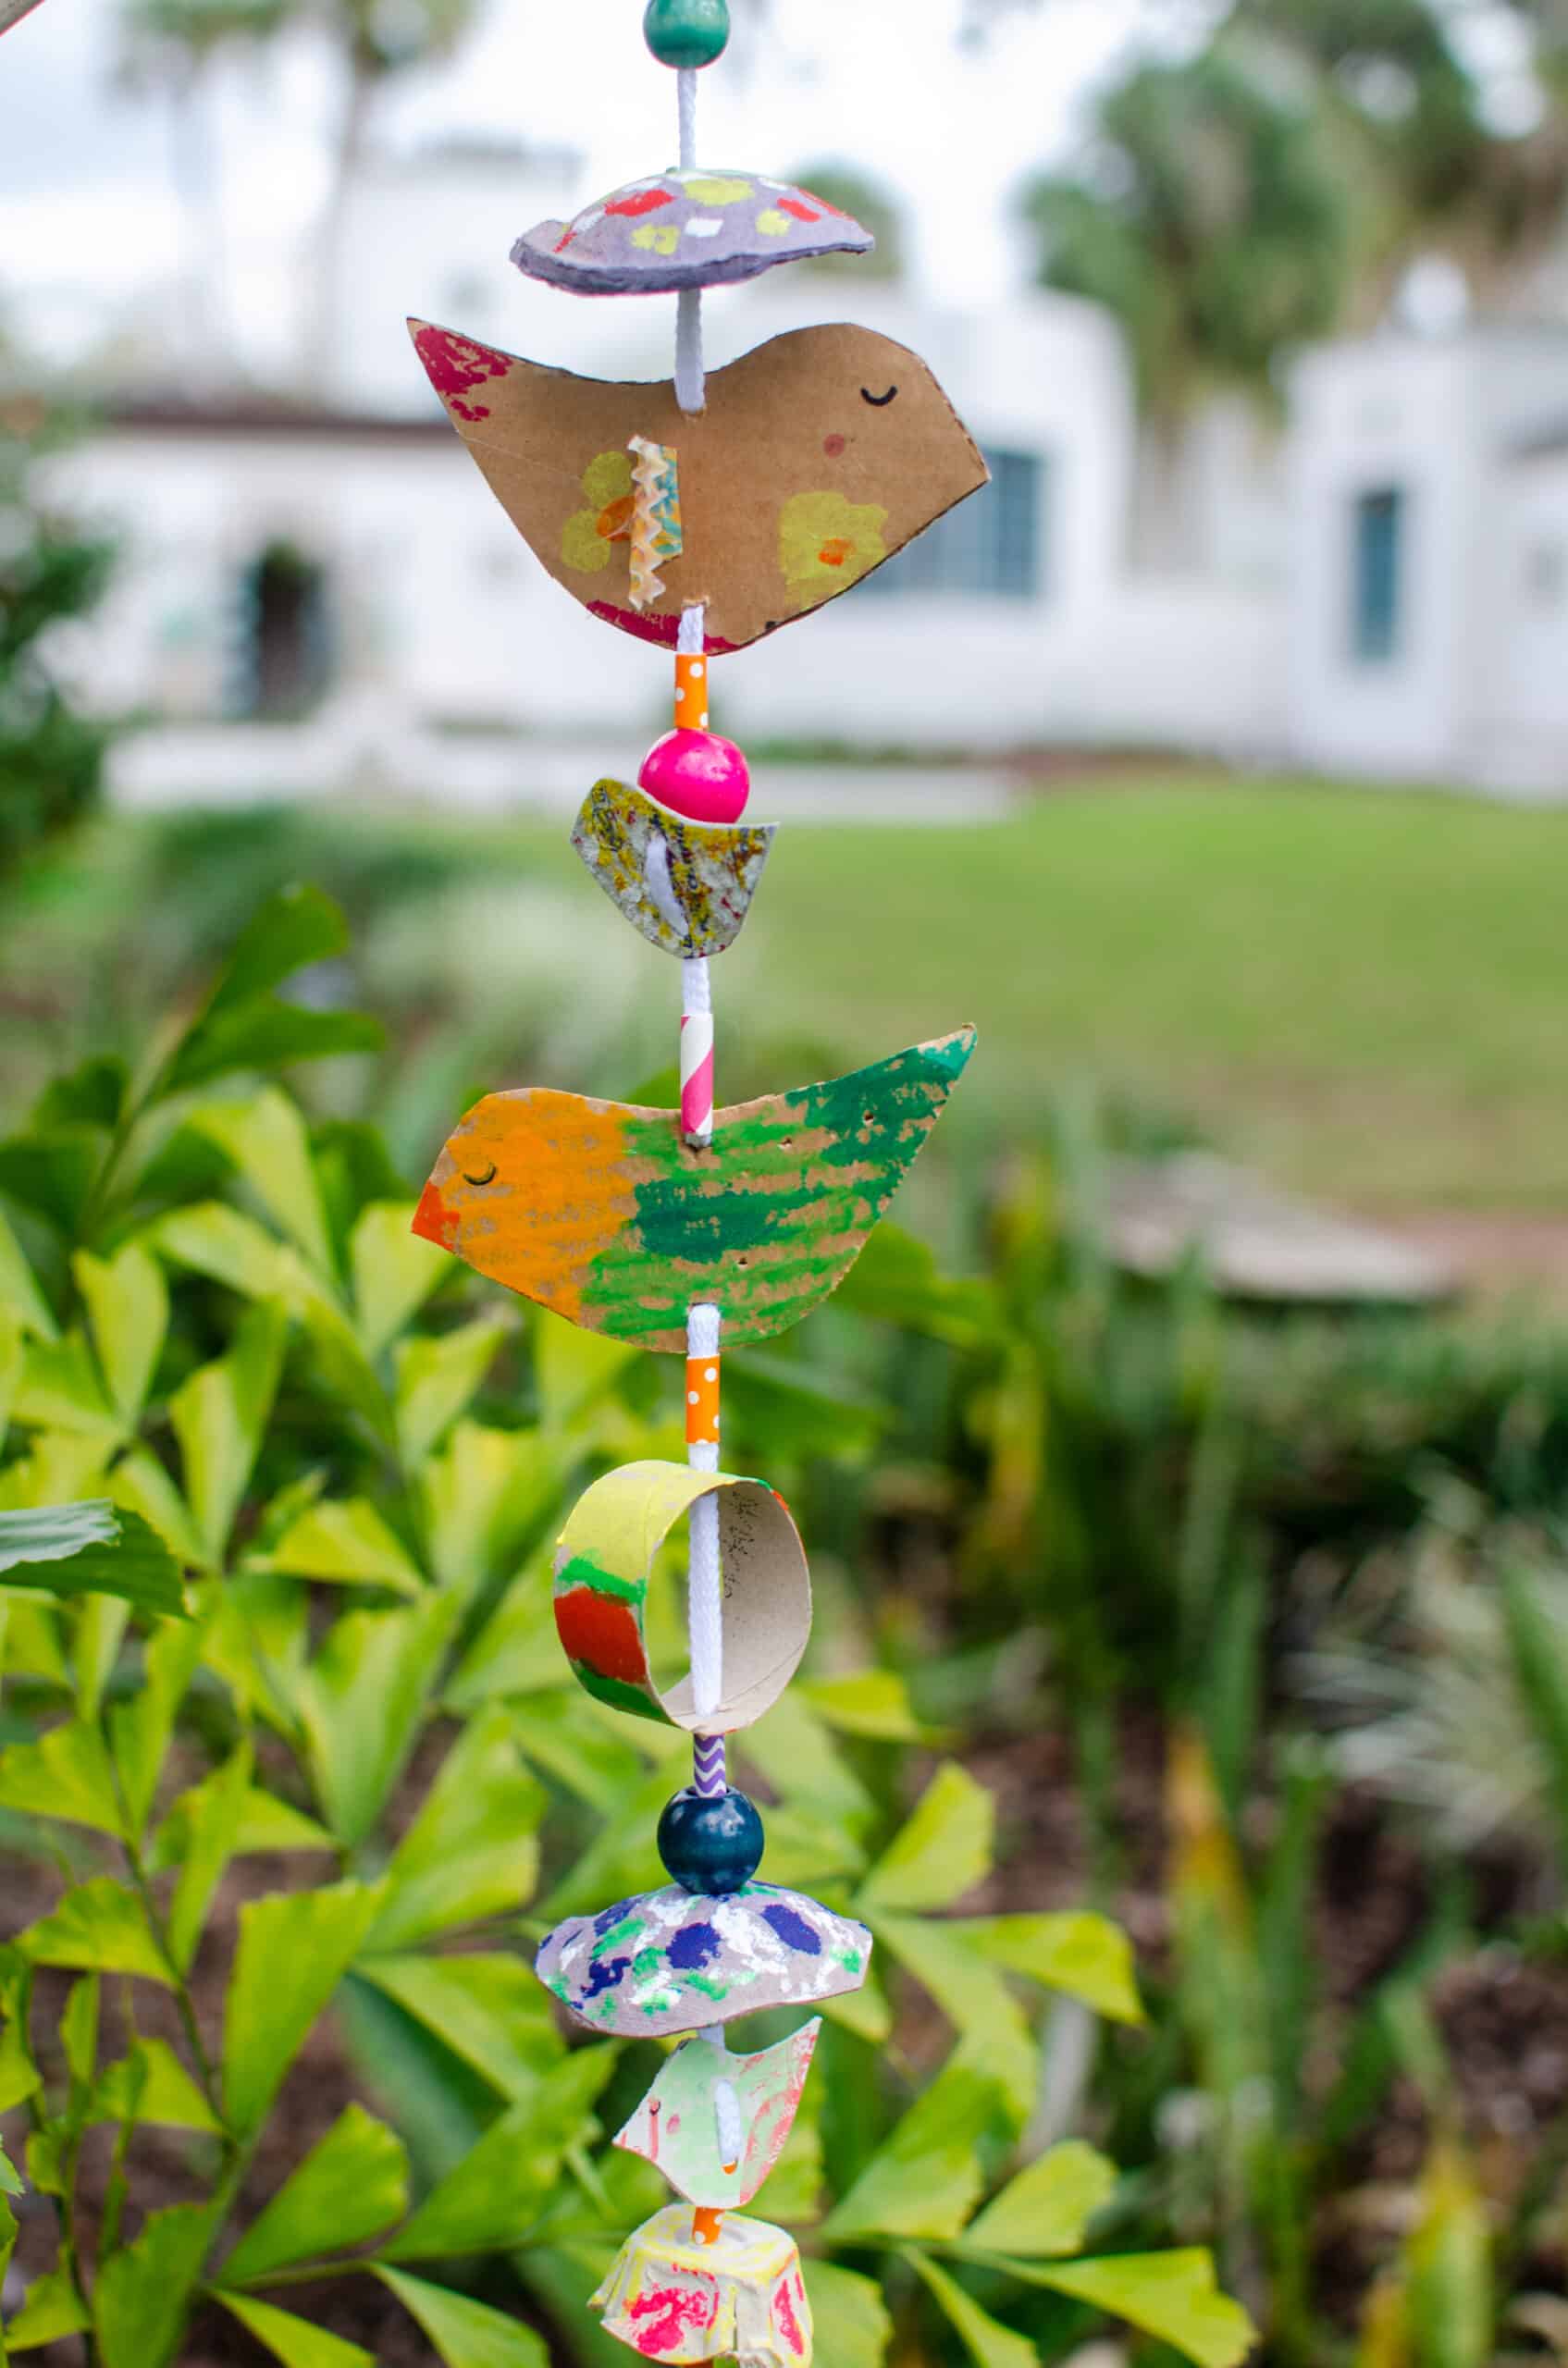 Colorful decoration that hangs vertically in front of vibrant bushes and leaves. Made of cardboard, beads, shoe laces, and paint. Decoration represents multiple cut-out cardboard birds, and other round organic shapes.